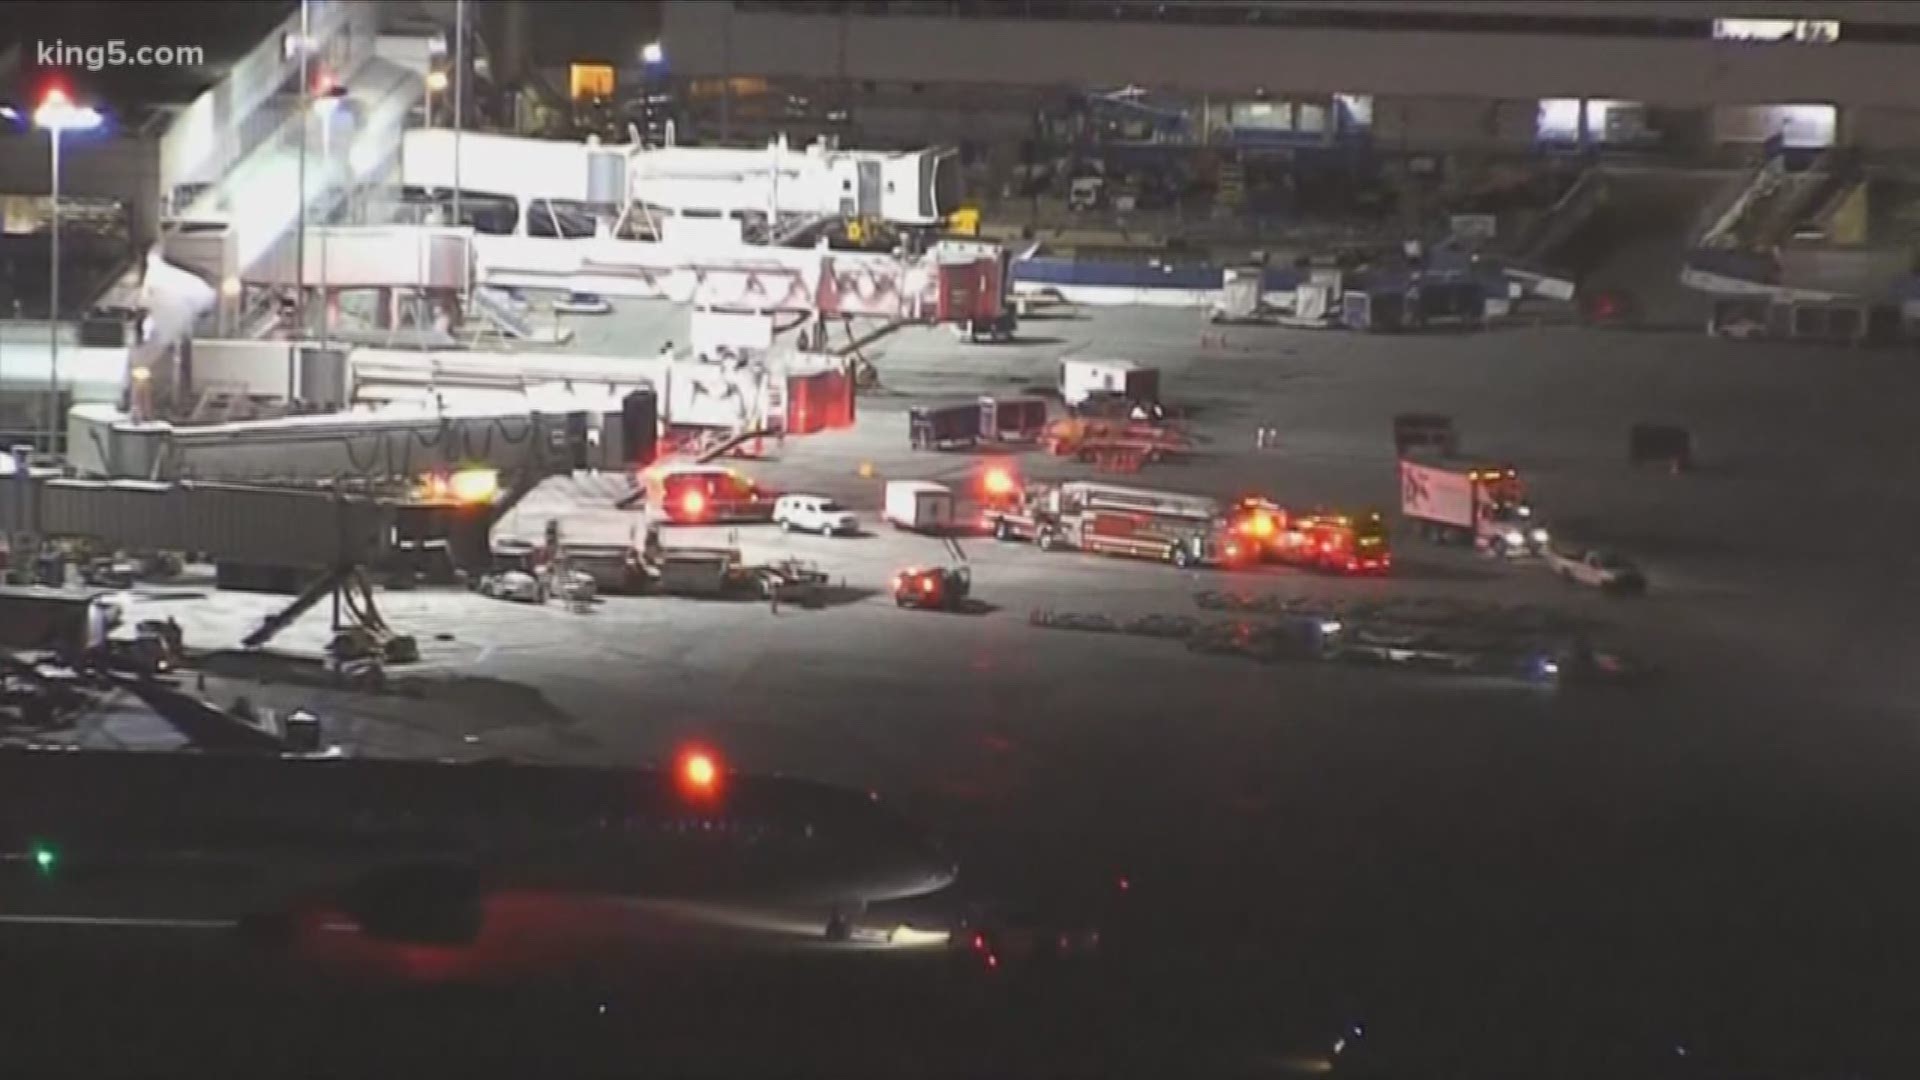 A girl flying on Delta flight 2423 Dec. 26 went into cardiac arrest and died. Police are investigating.